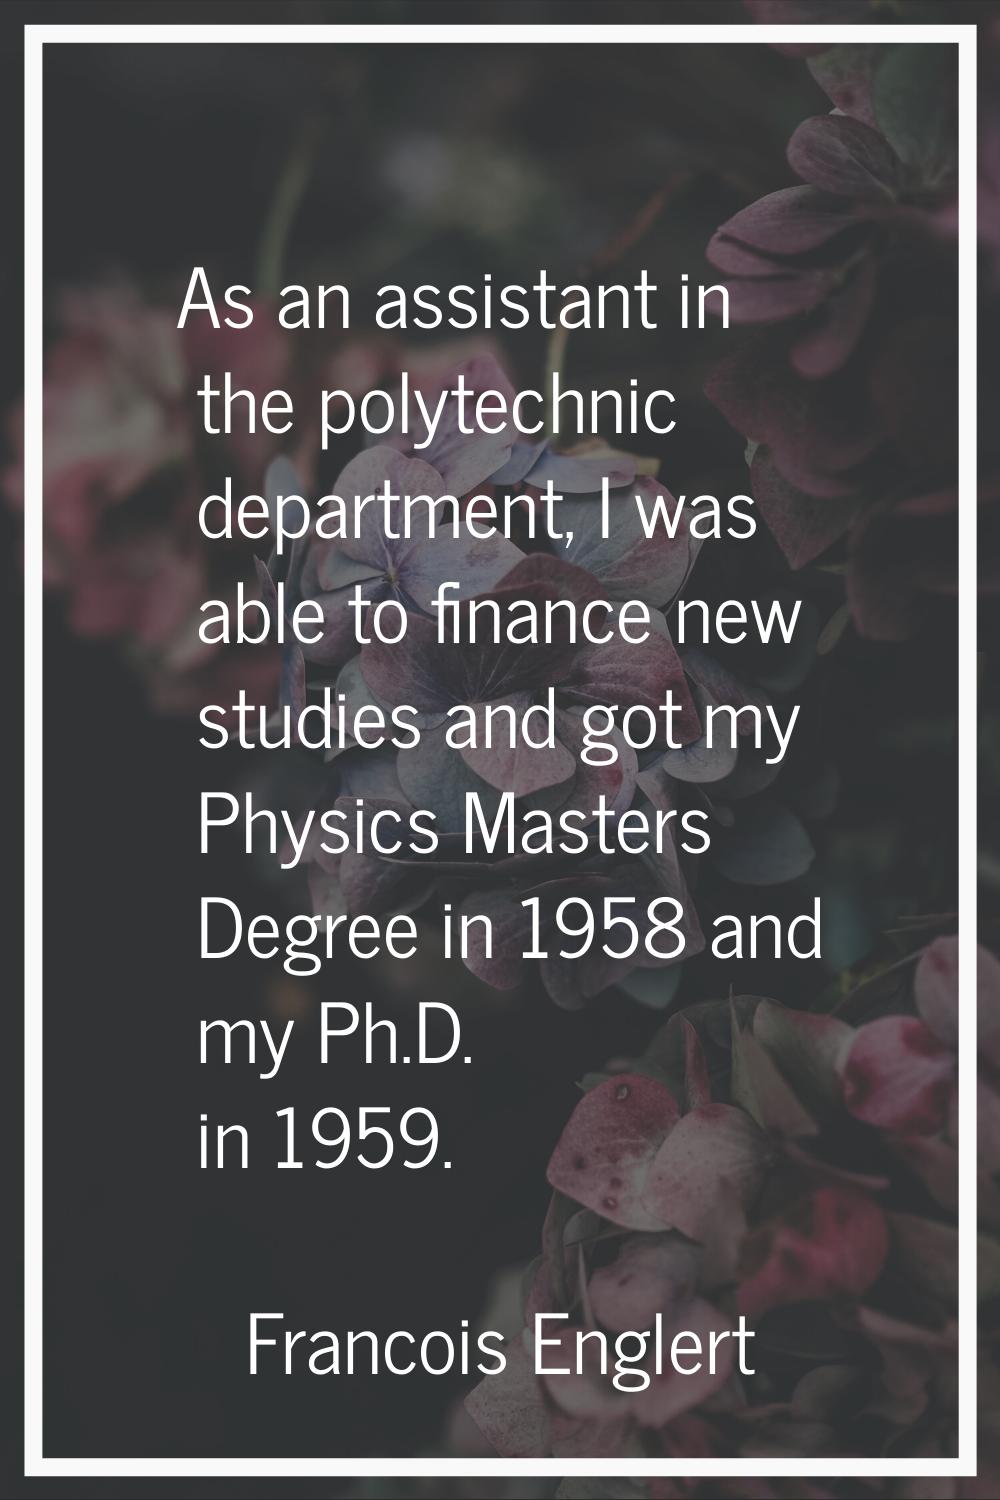 As an assistant in the polytechnic department, I was able to finance new studies and got my Physics